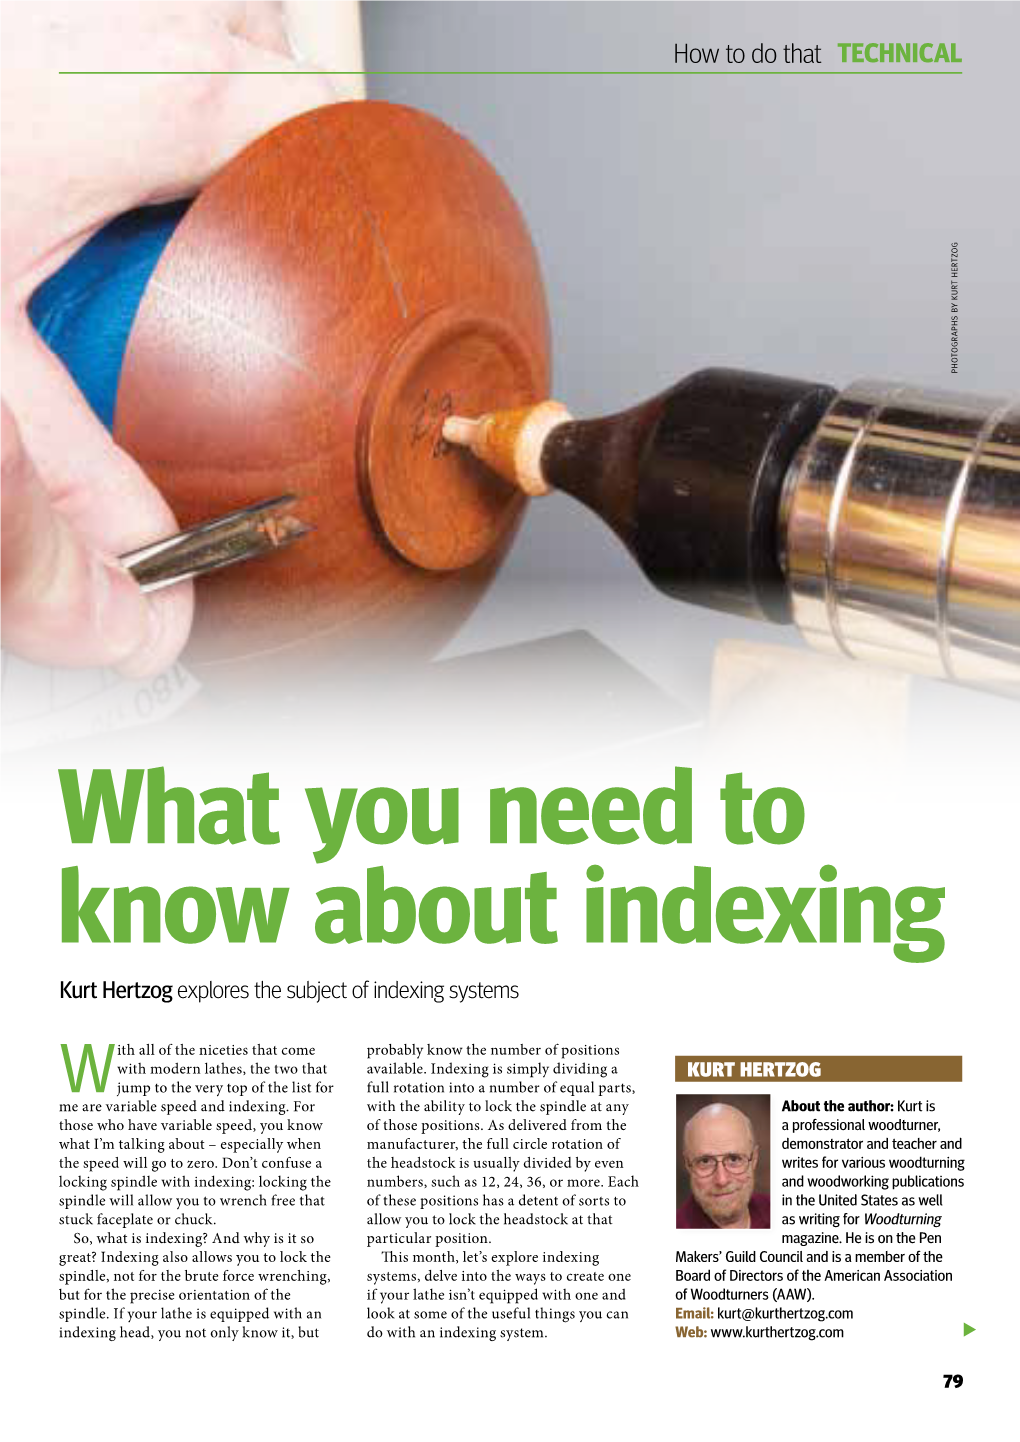 What You Need to Know About Indexing Kurt Hertzog Explores the Subject of Indexing Systems